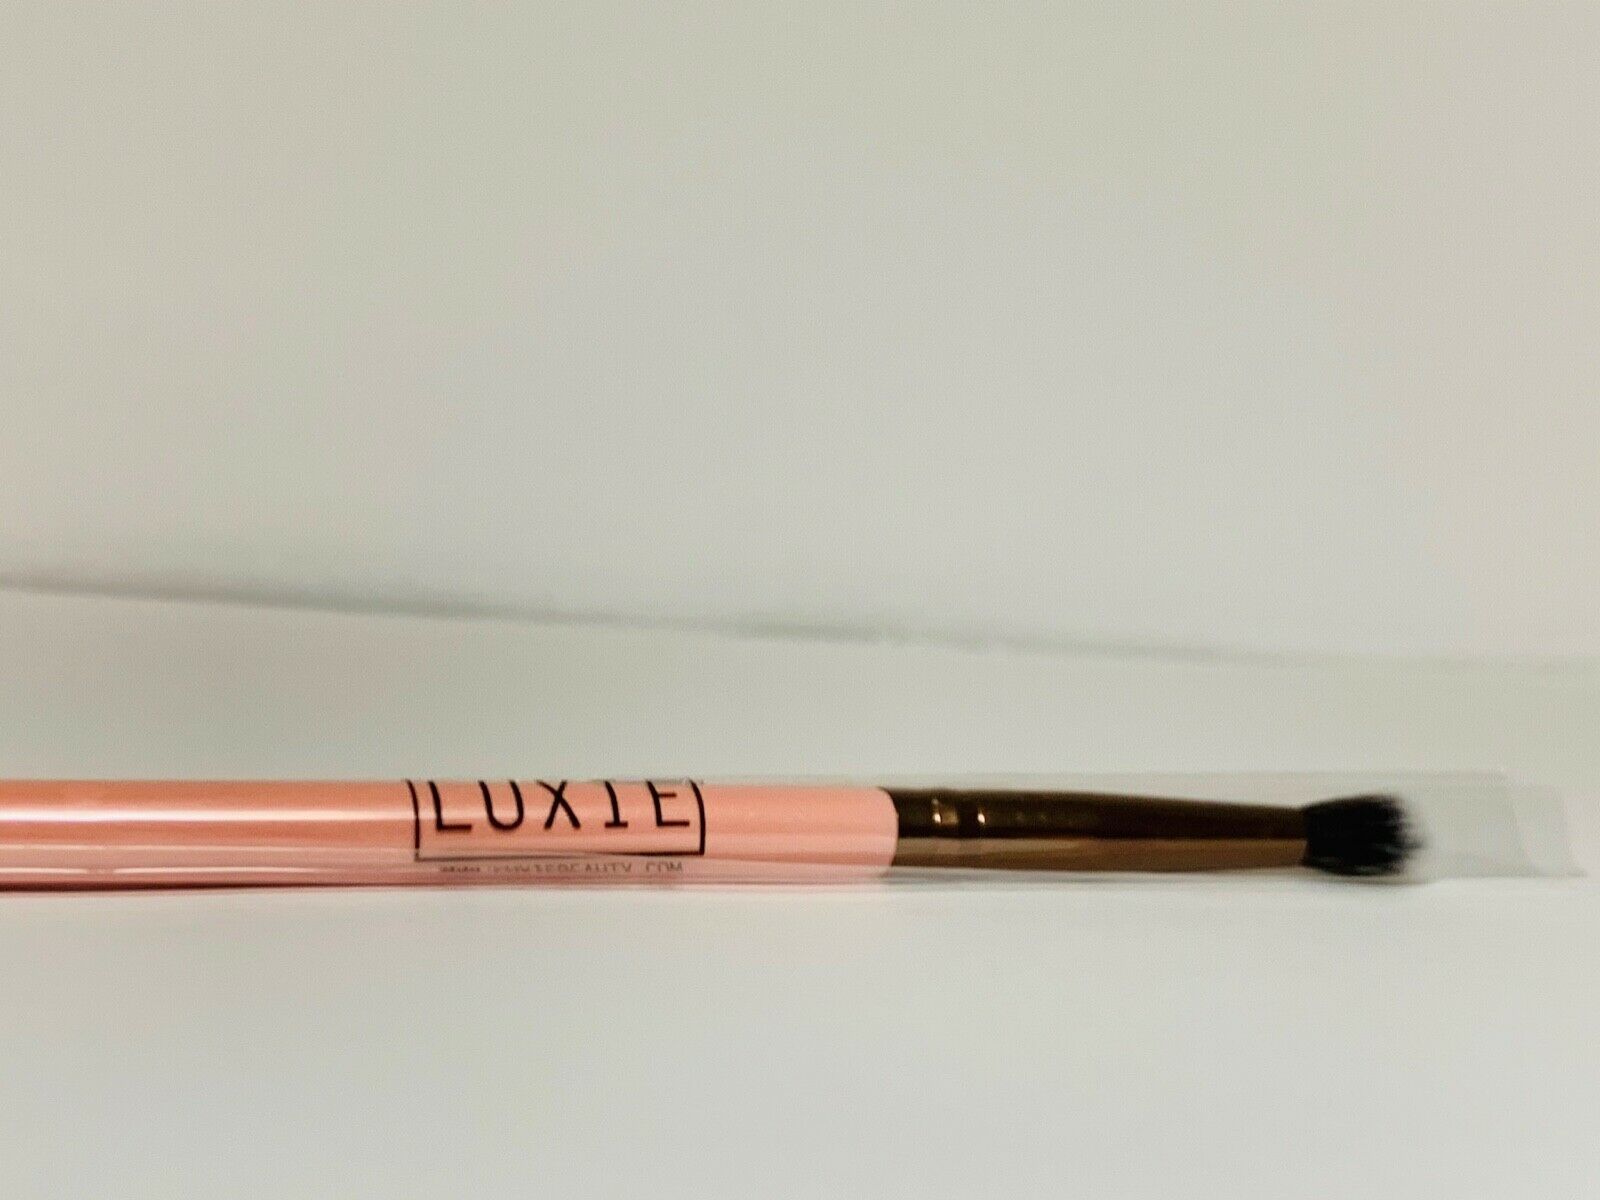 Luxie Beauty 231 Rose Gold Small Tapered Blending Eye shadow Brush - $9.74